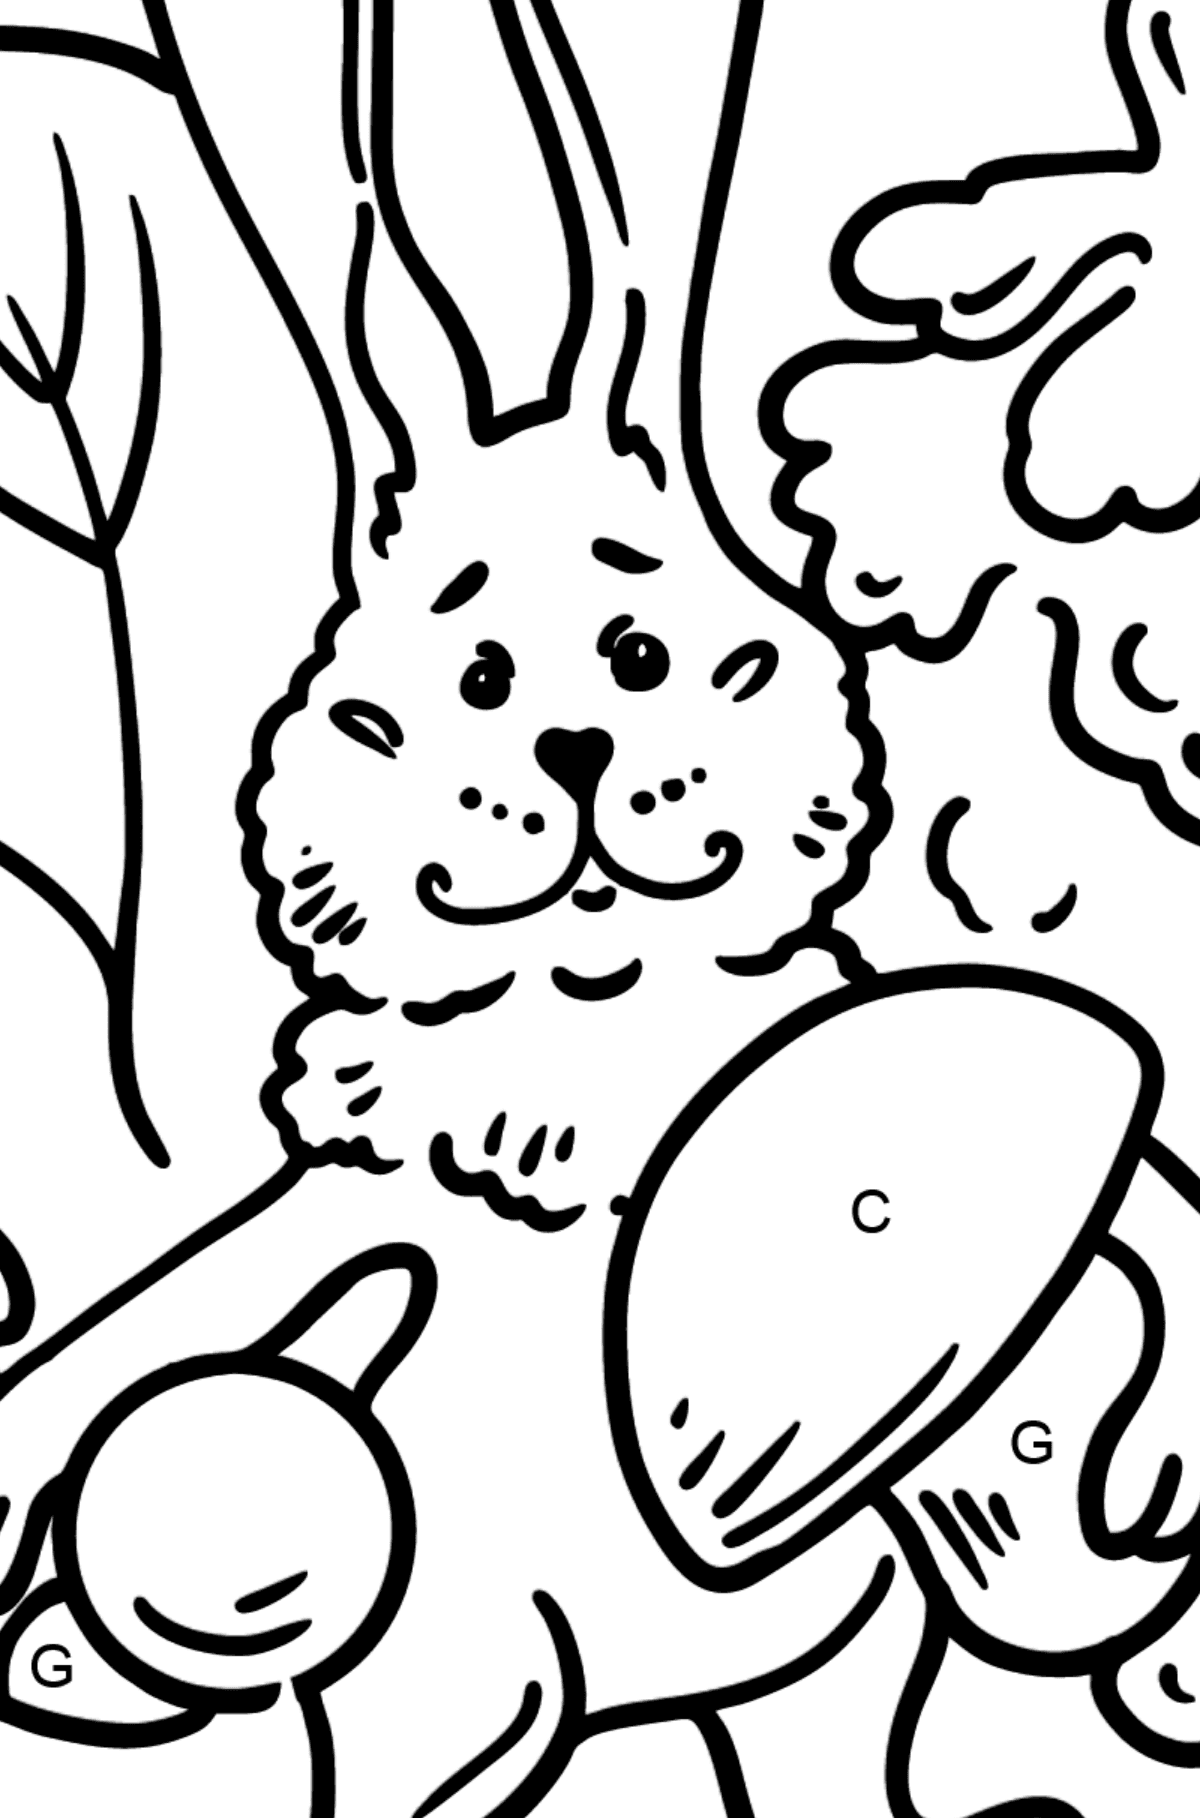 Bunny in the Forest coloring page - Coloring by Letters for Kids